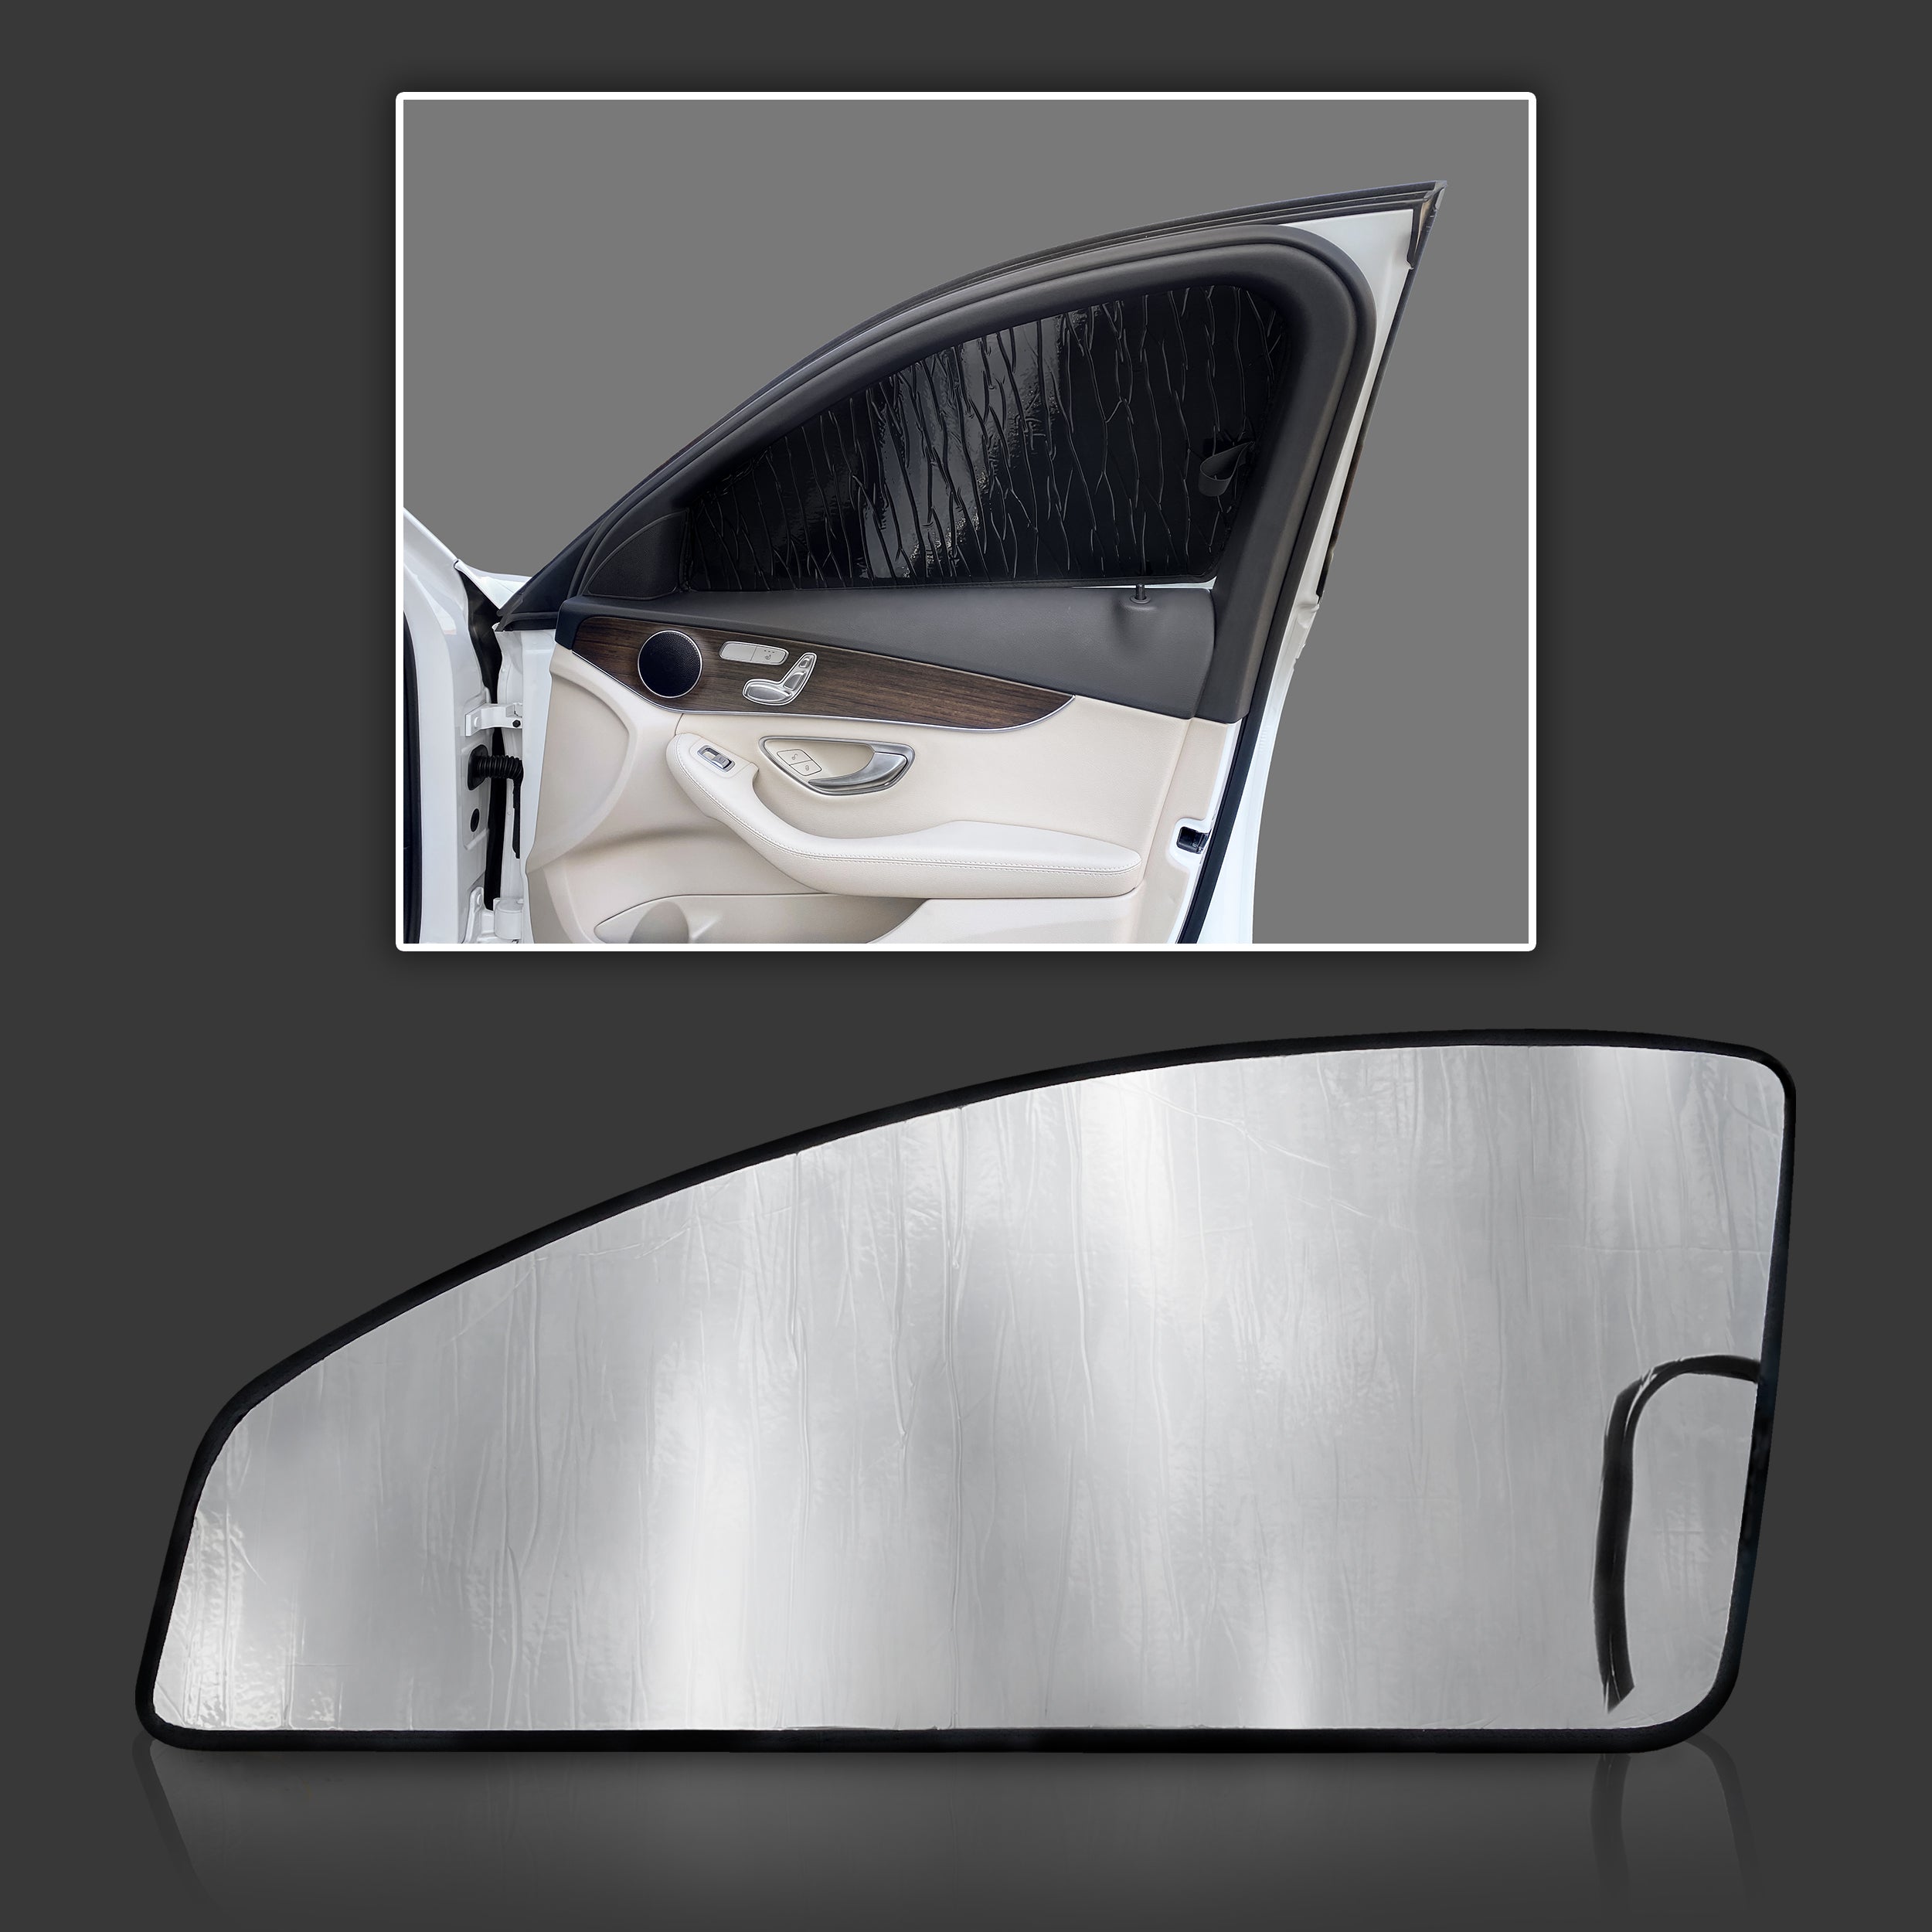 Sunshades for 2015-2021 Mercedes-Benz C-Class Sedan (View for more options)